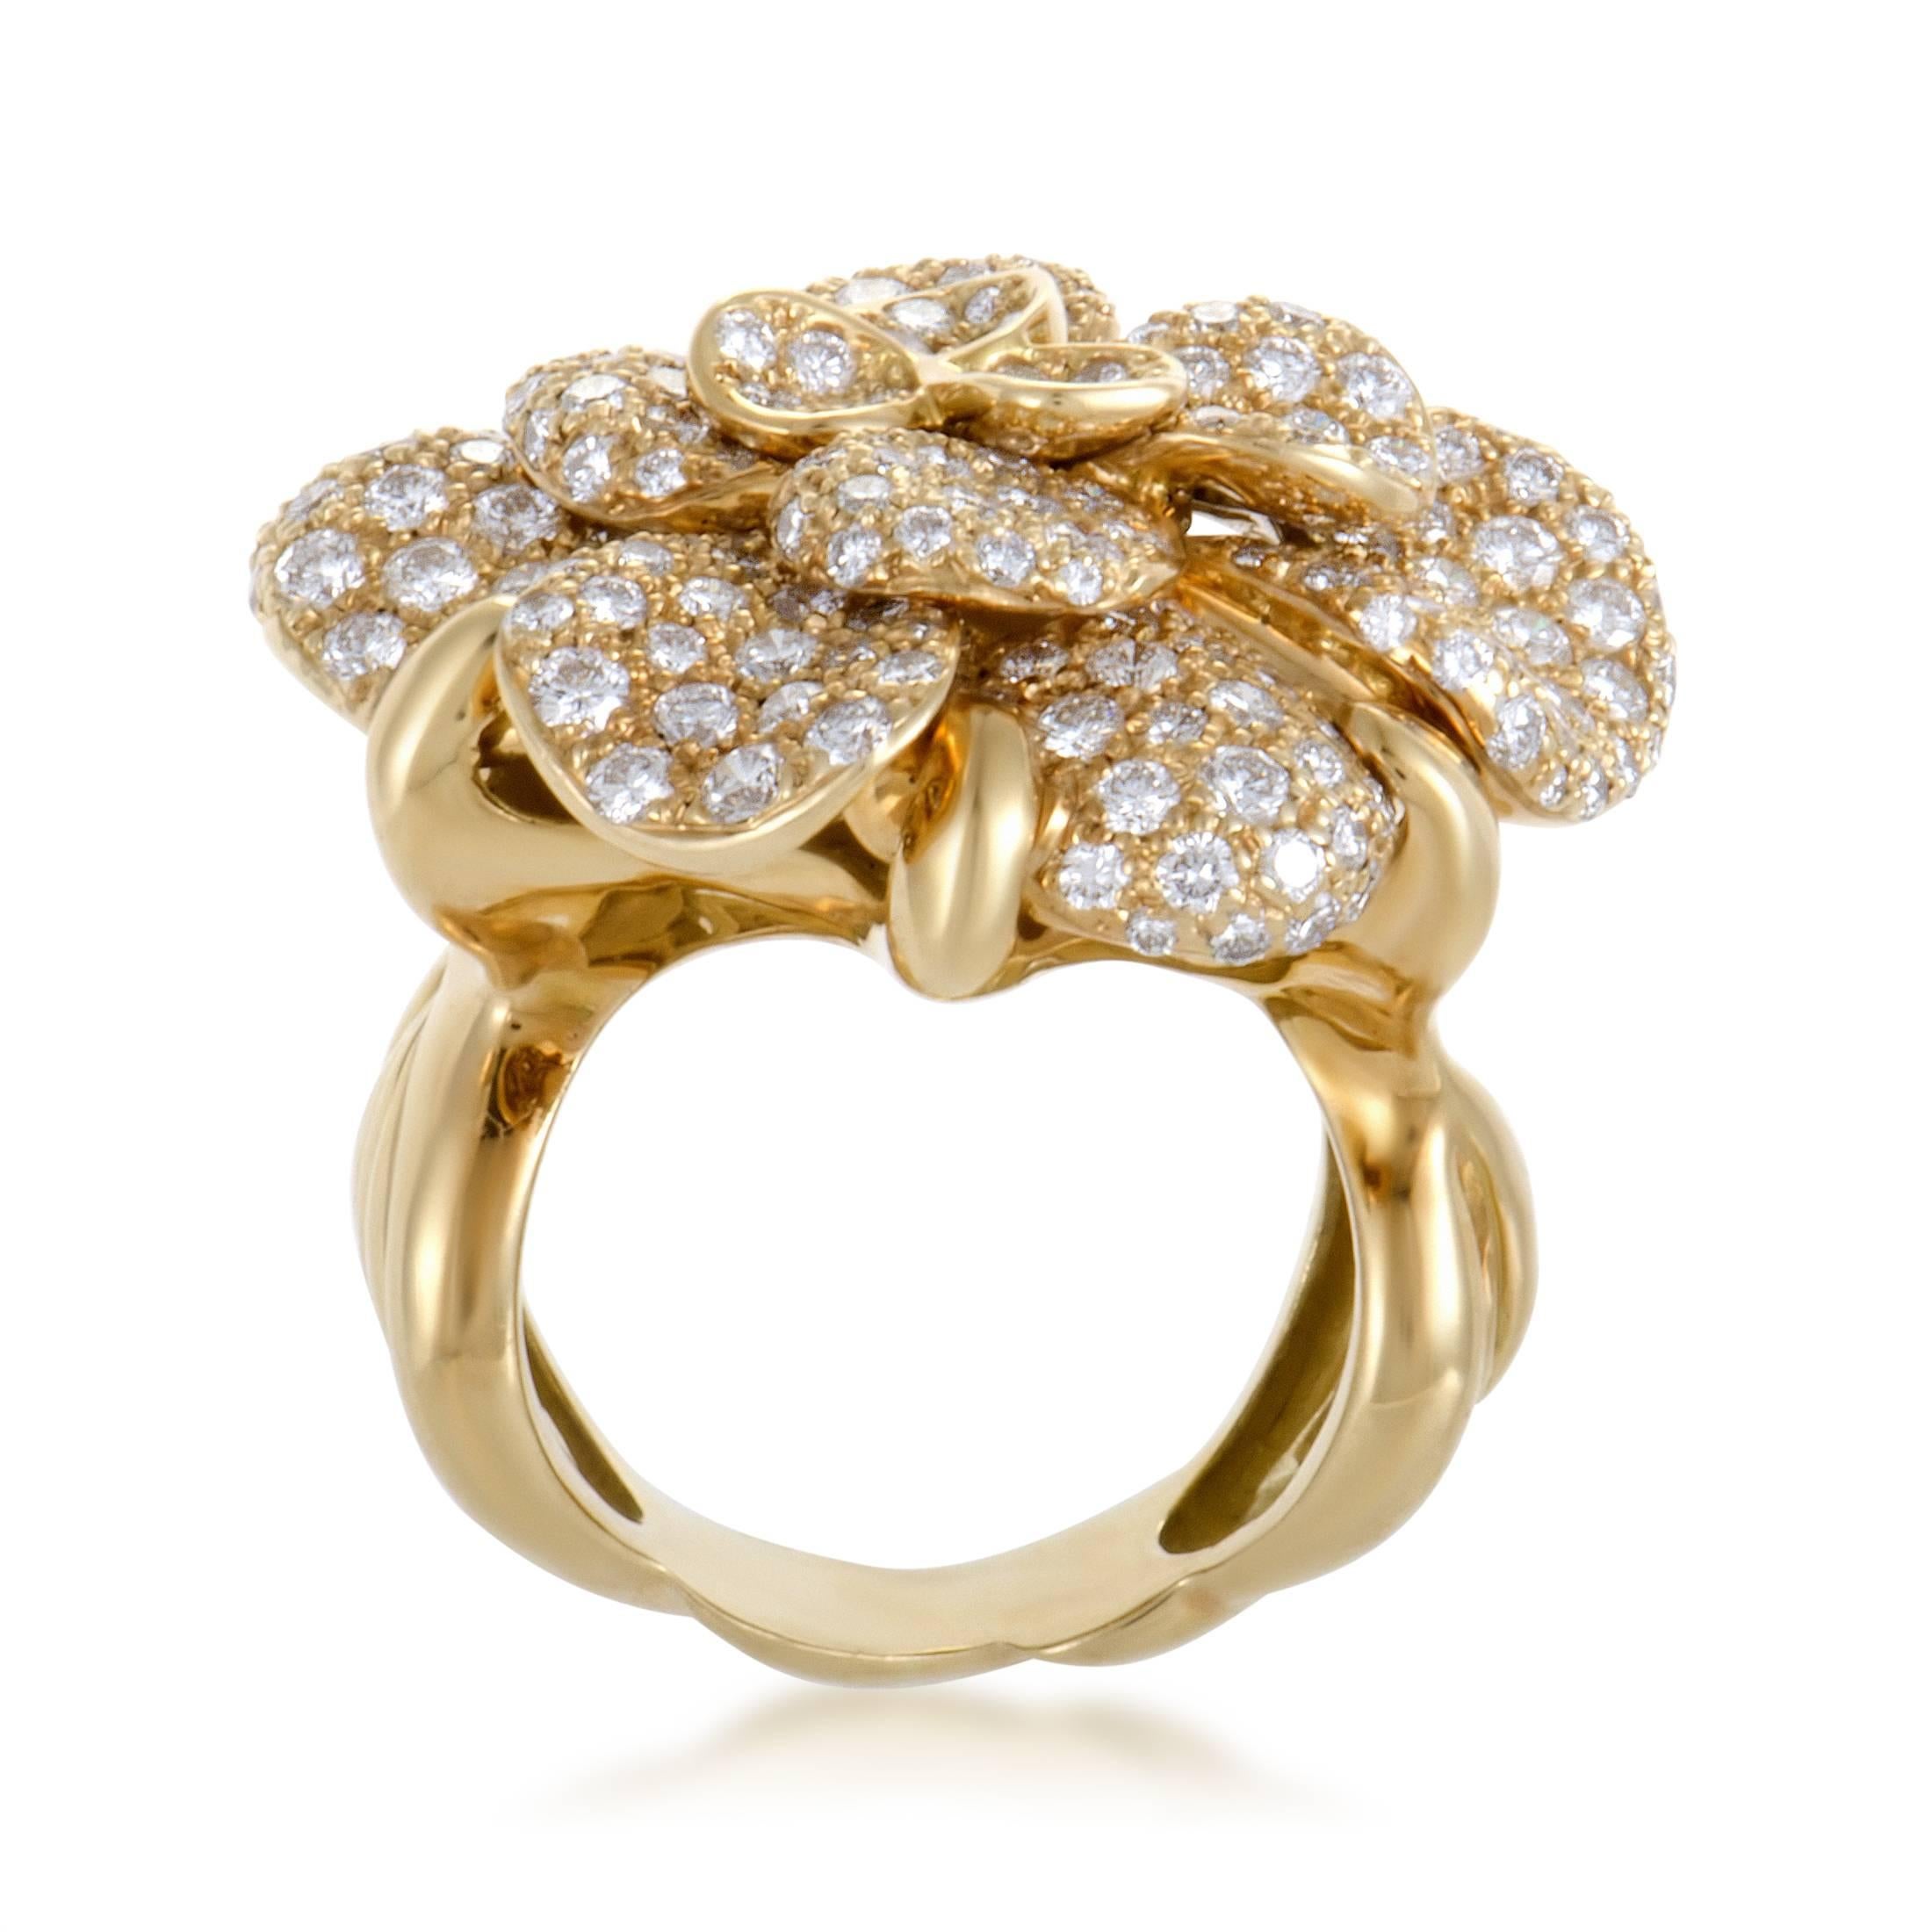 Presenting one of their most iconic motifs in fabulously radiant and delightfully realistic fashion, Chanel created this enchanting 18K yellow gold ring with the compelling camellia flower motif embellished with 250 lustrous diamonds for a dazzling